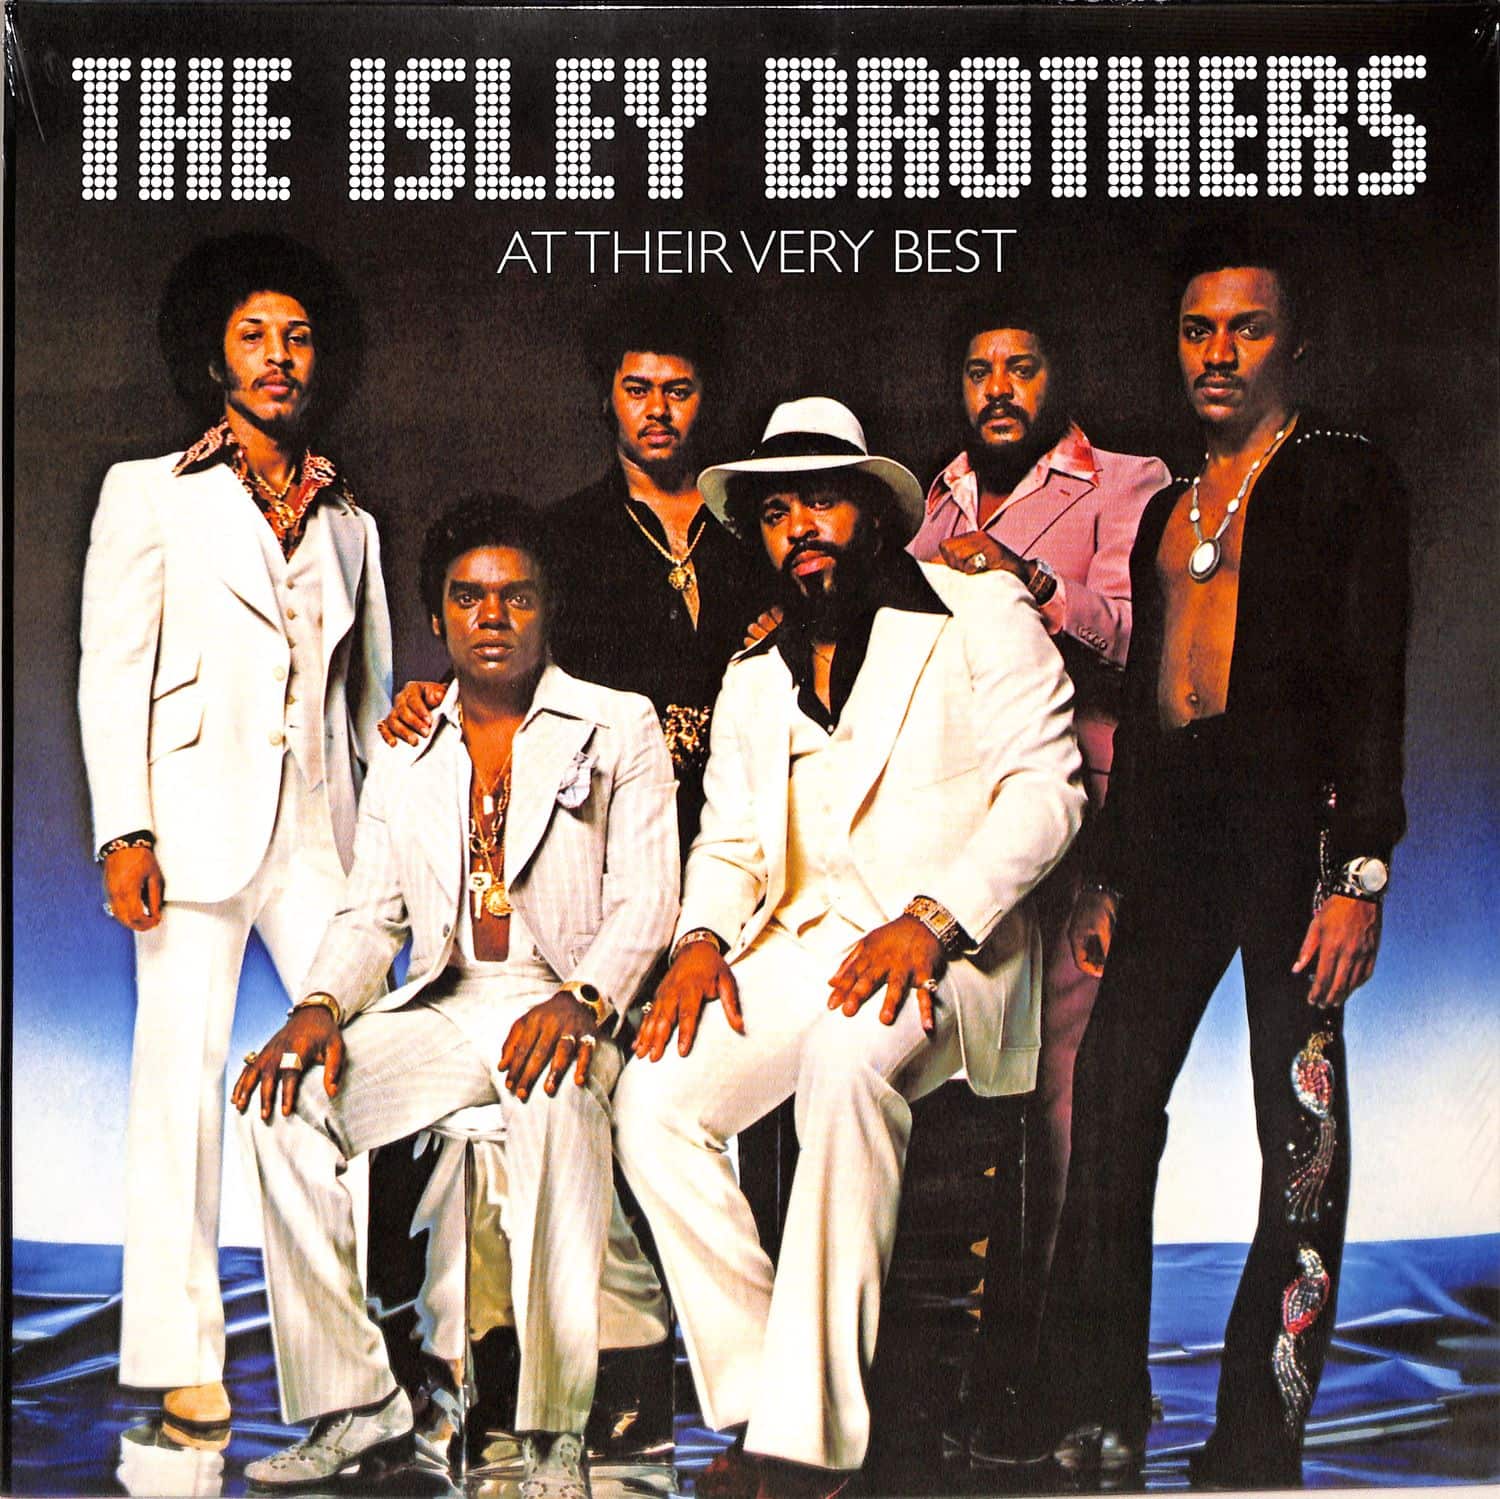 The Isley Brothers - AT THEIR VERY BEST 